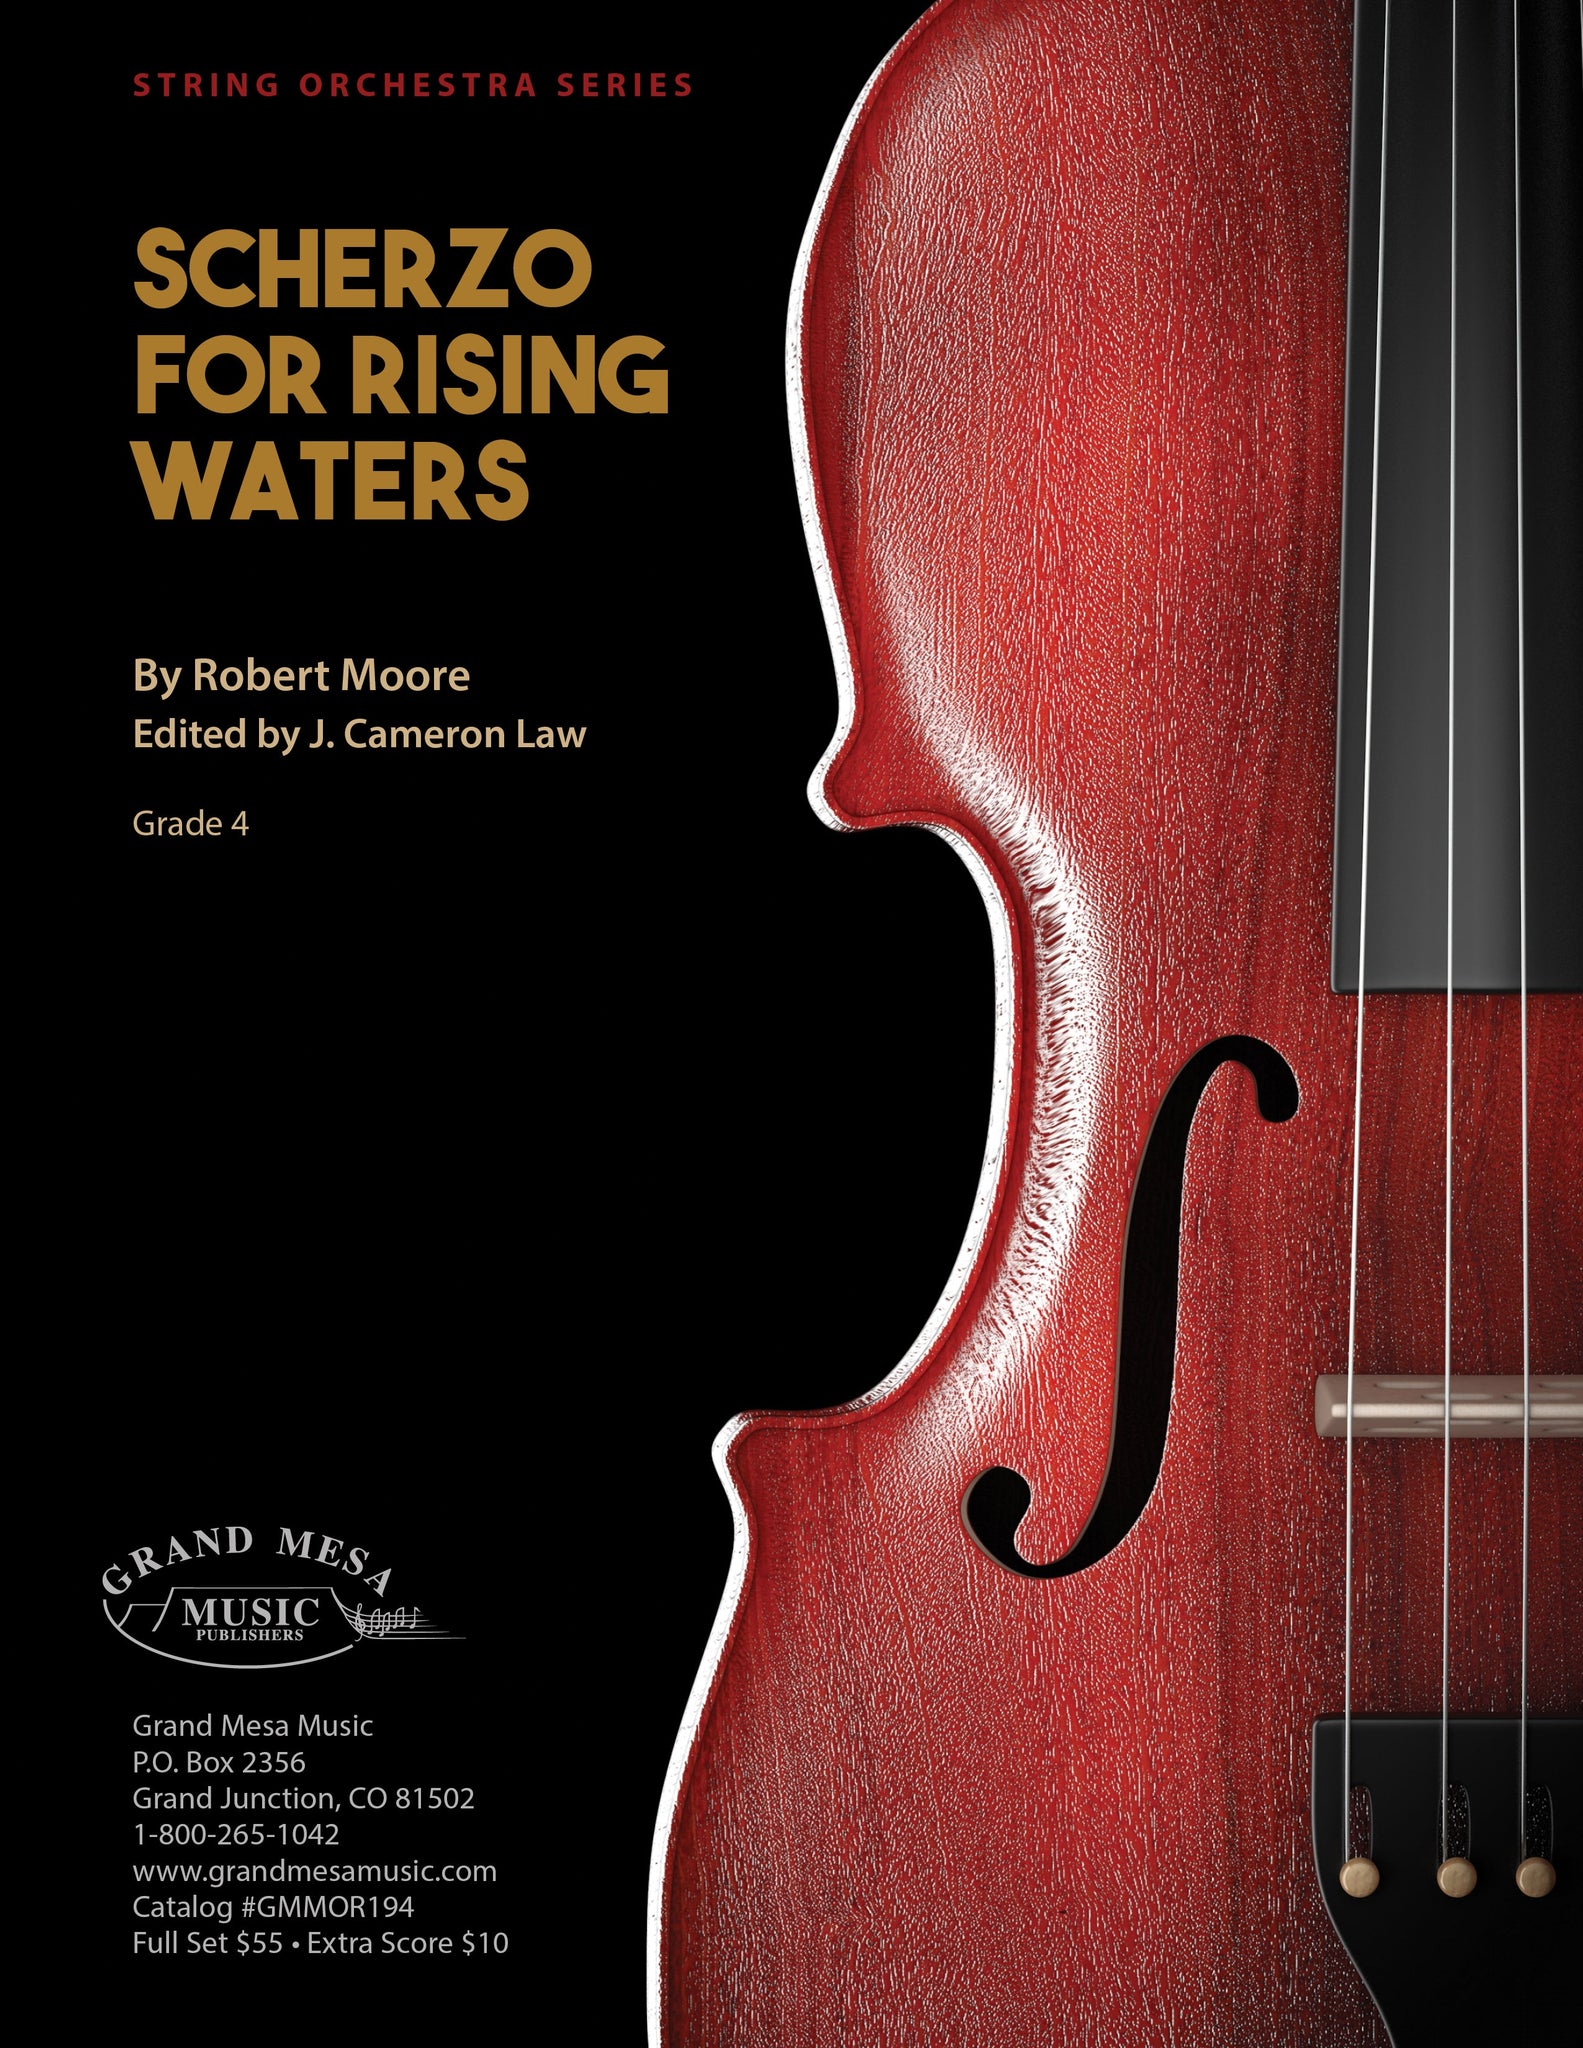 Strings sheet music cover of Scherzo for Rising Waters, composed by Robert Moore.